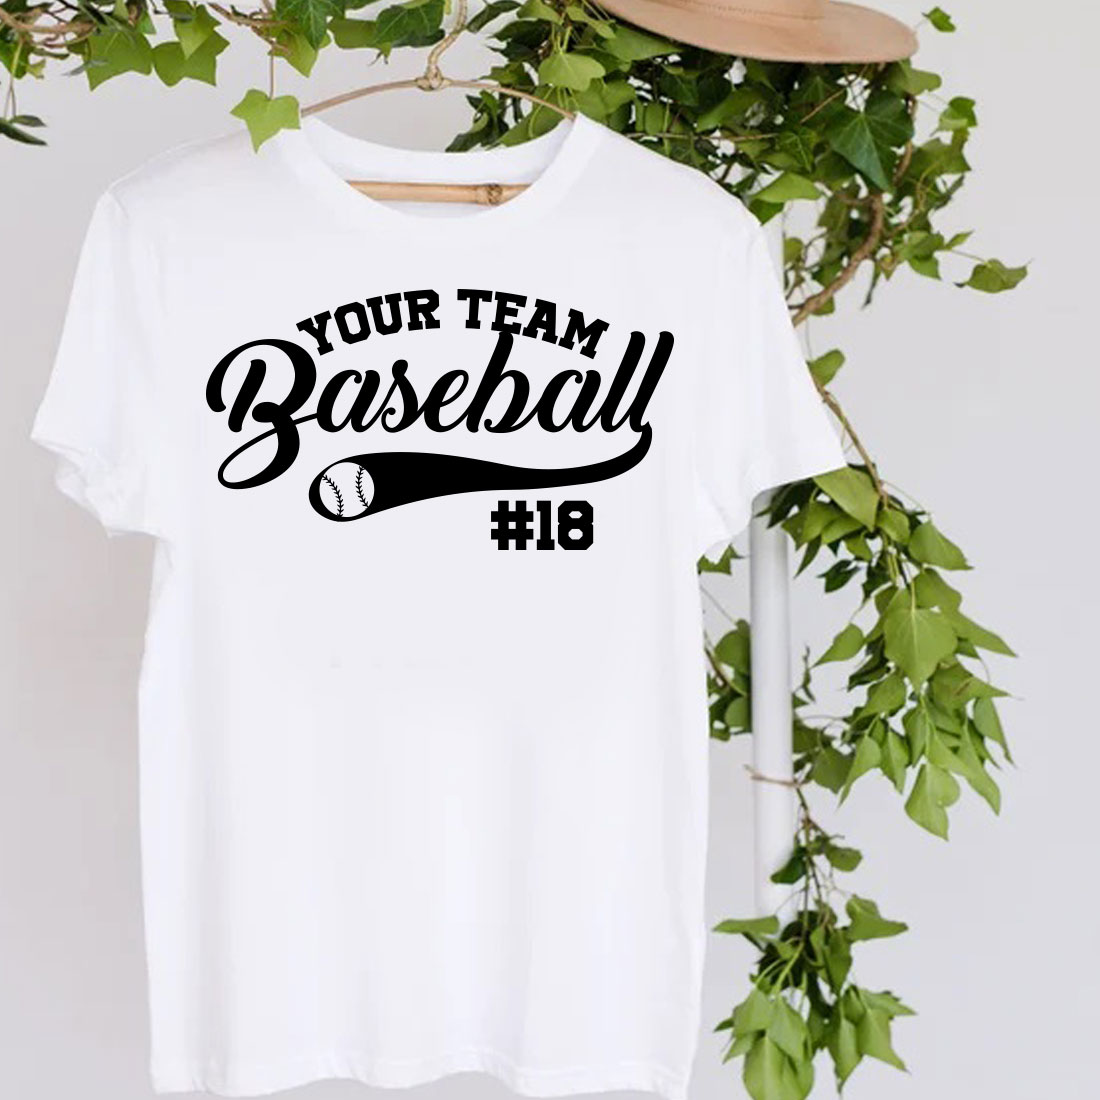 T - shirt that says your team baseball is 18.